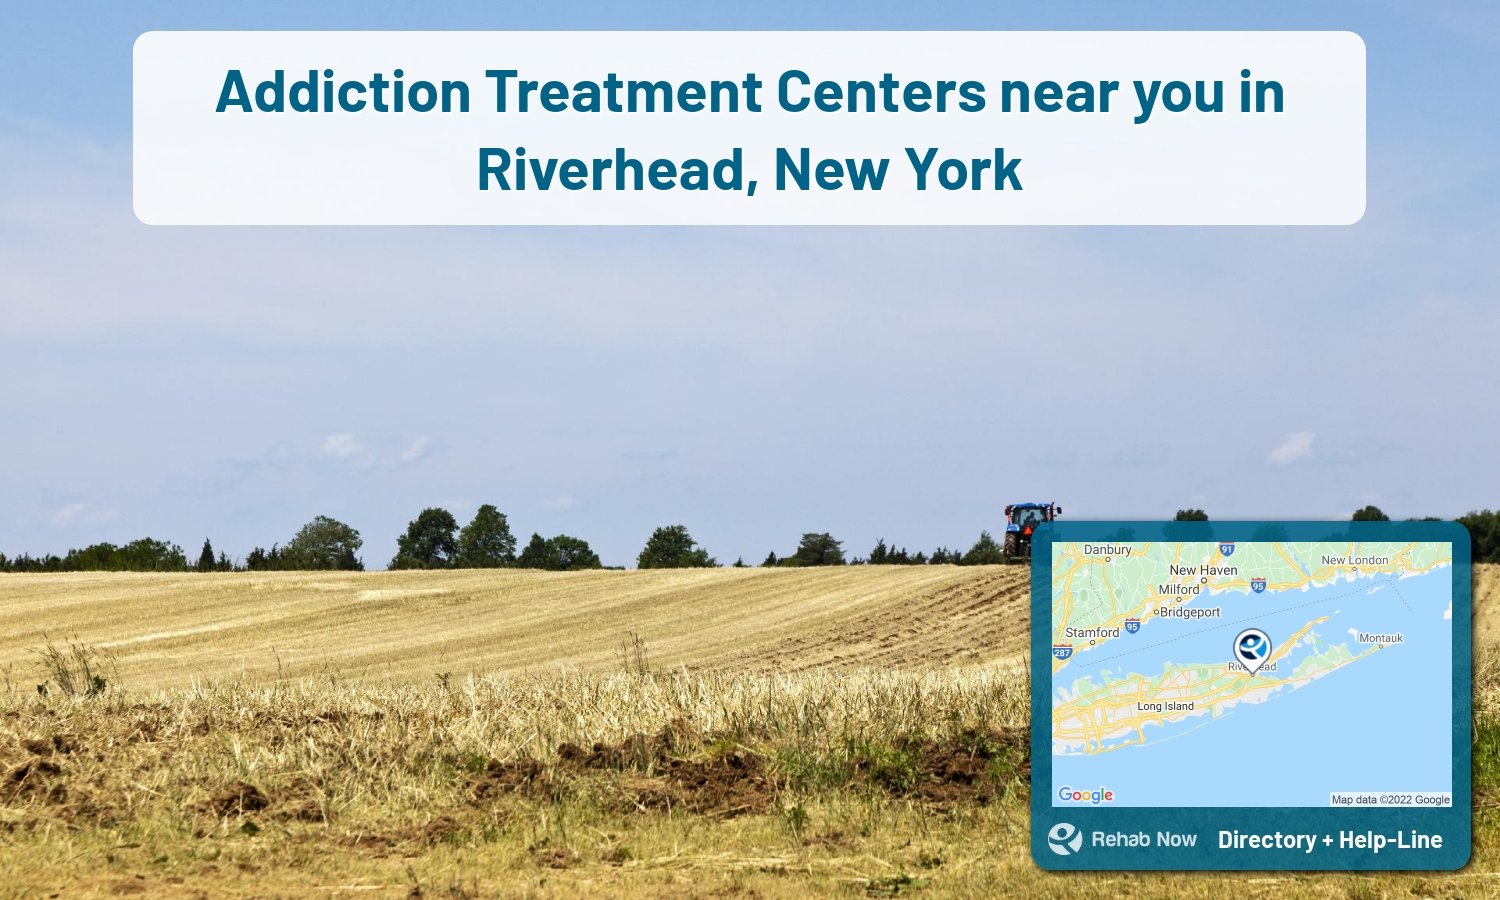 Our experts can help you find treatment now in Riverhead, New York. We list drug rehab and alcohol centers in New York.